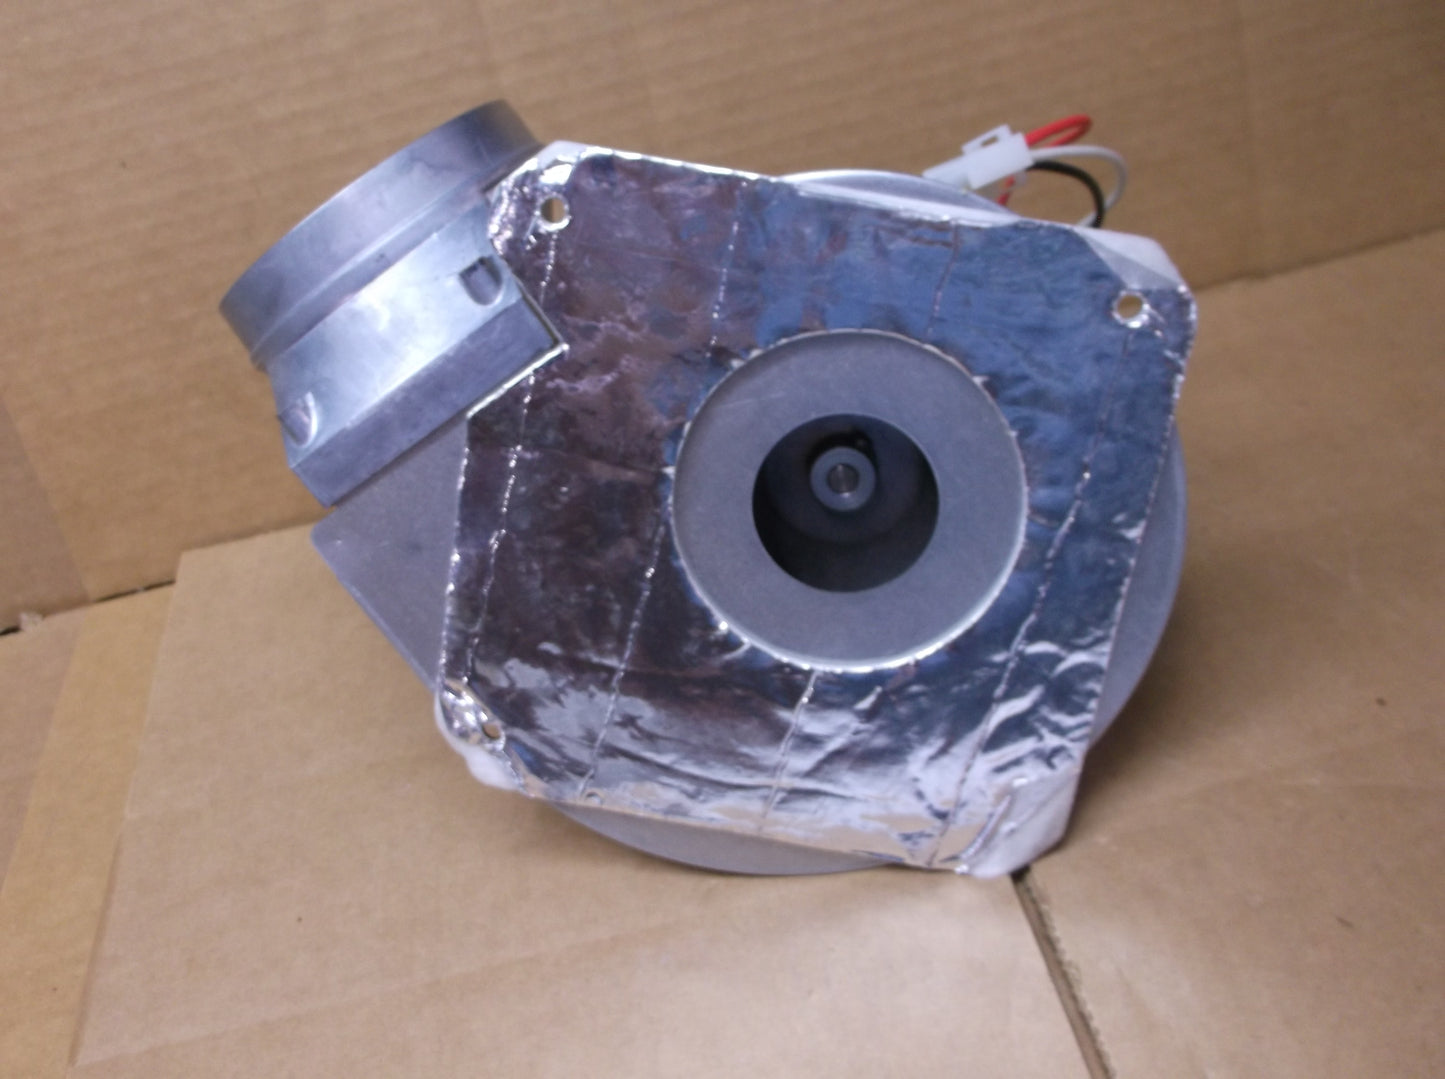 DRAFT INDUCER BLOWER ASSEMBLY 2-STAGE  VOLTAGE:120,HERTZ:60,RPM:3200/2700 2-SPEED